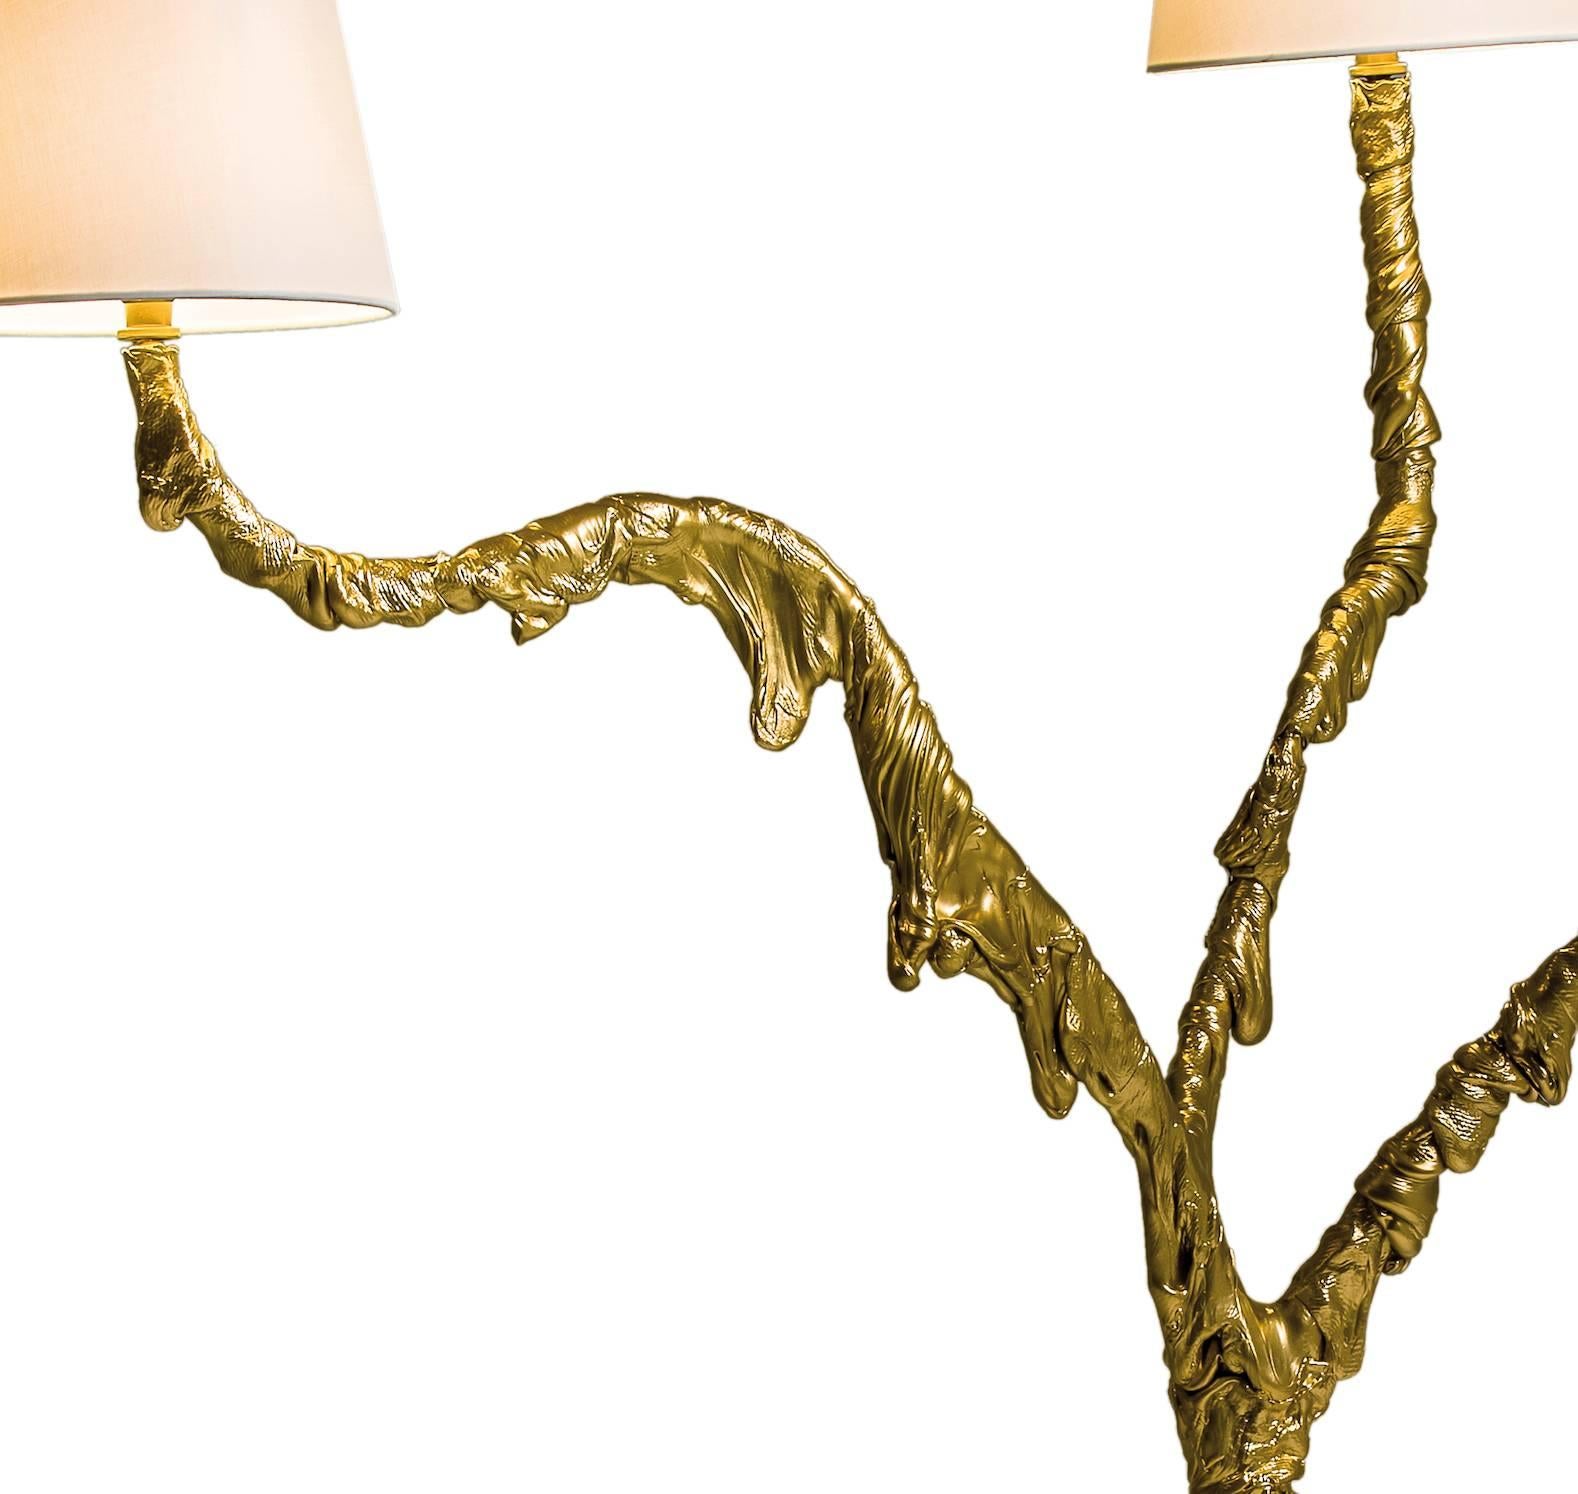 Contemporary Edra Ines Floor Lamp Sculpture in Hand-Molded Gold Polymer For Sale